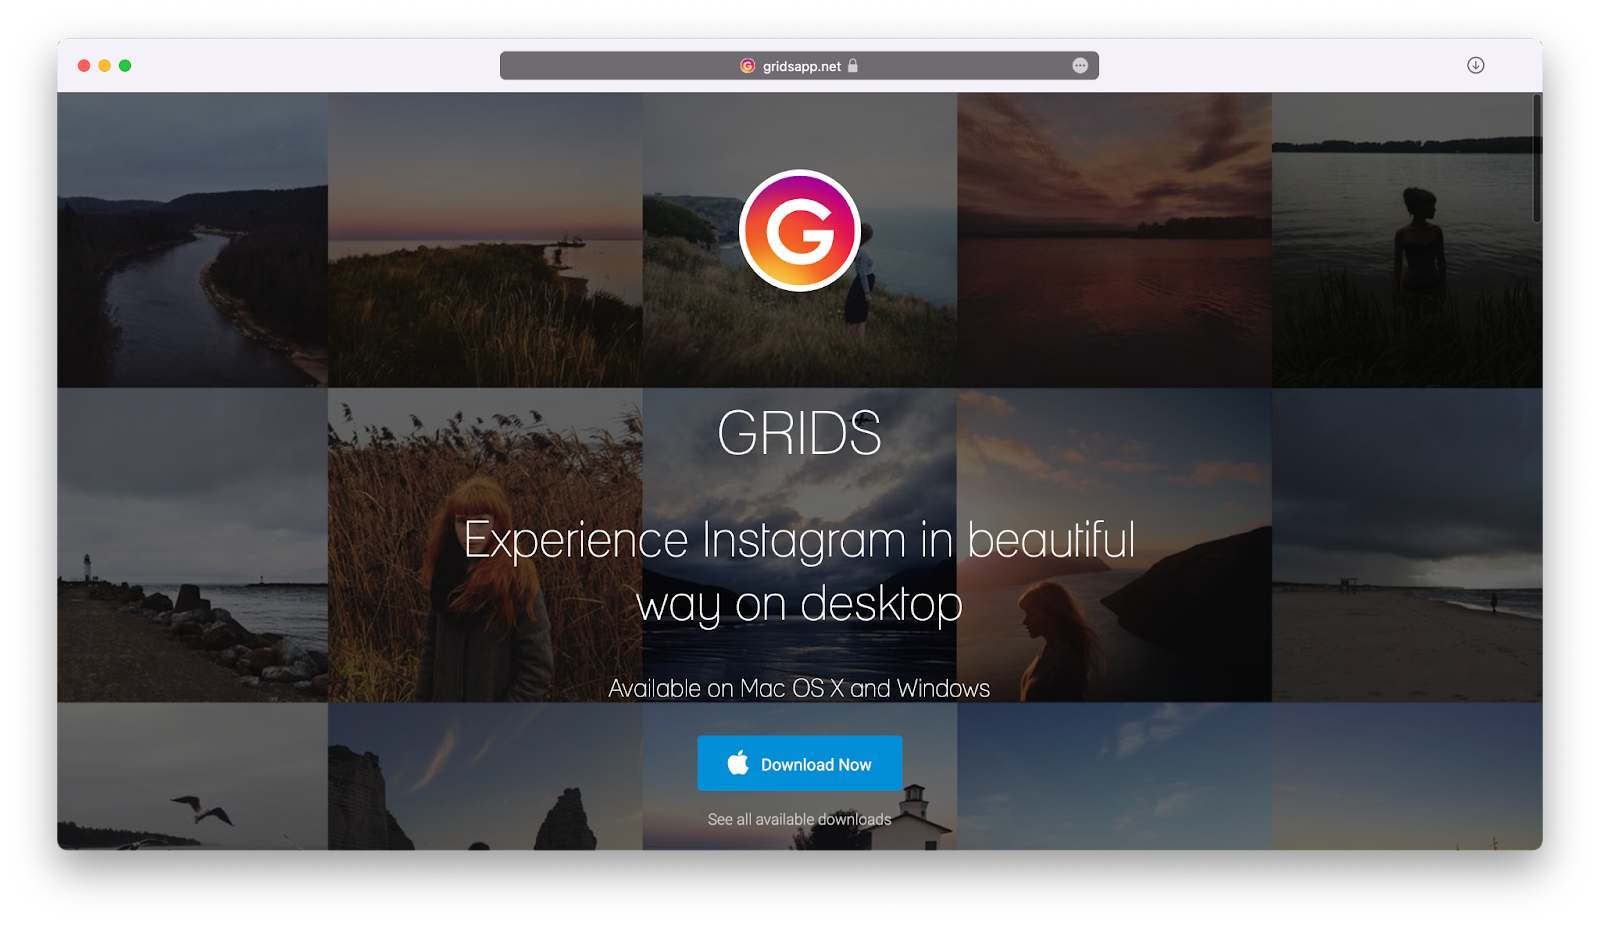 GRIDS Experience Instagram in a beautiful way on your desktop